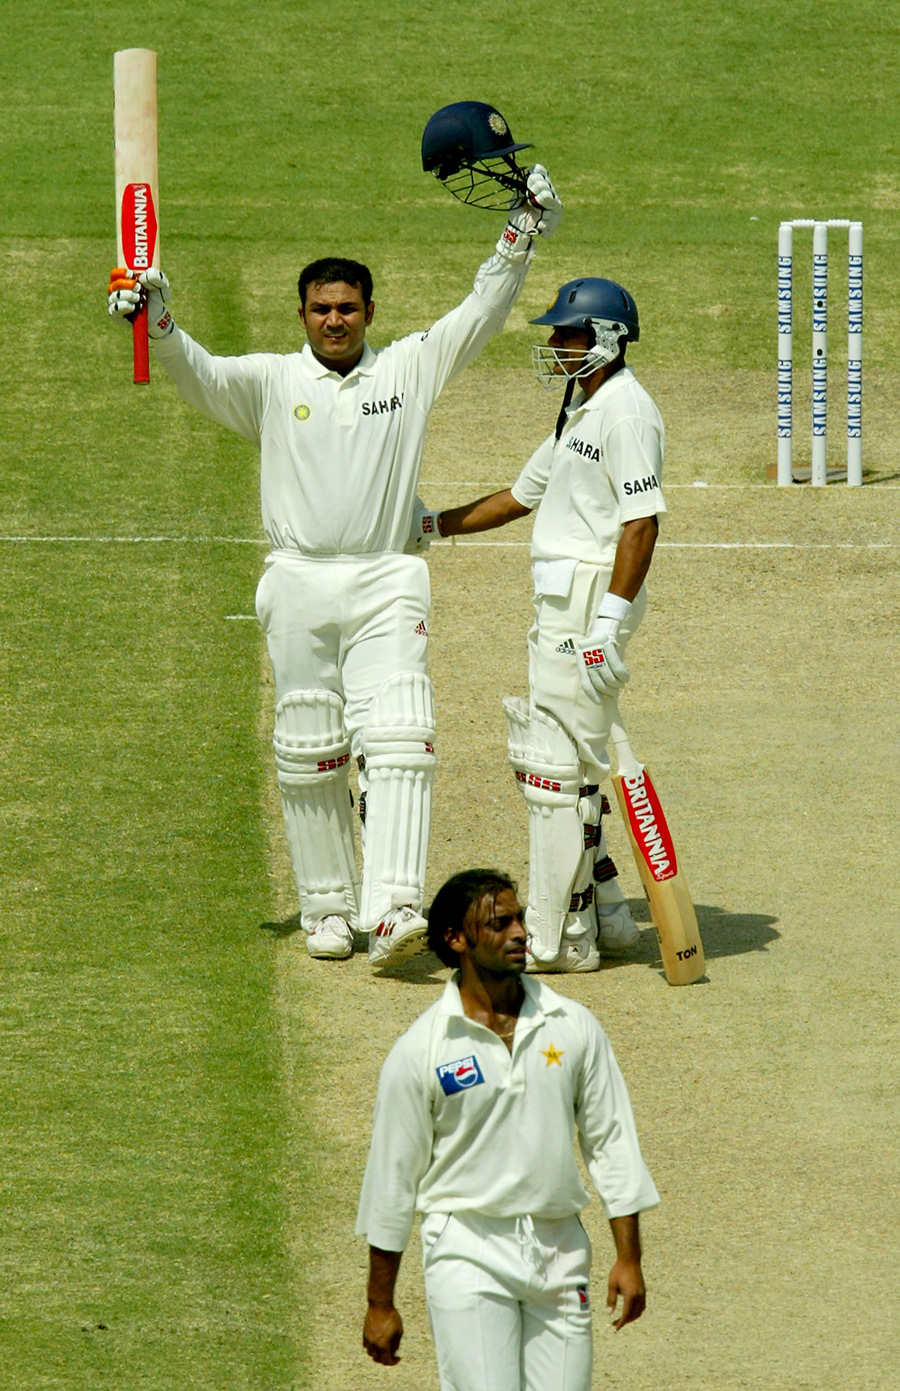 At a strike rate of 82, Virender Sehwag gets to 300 with a massive six